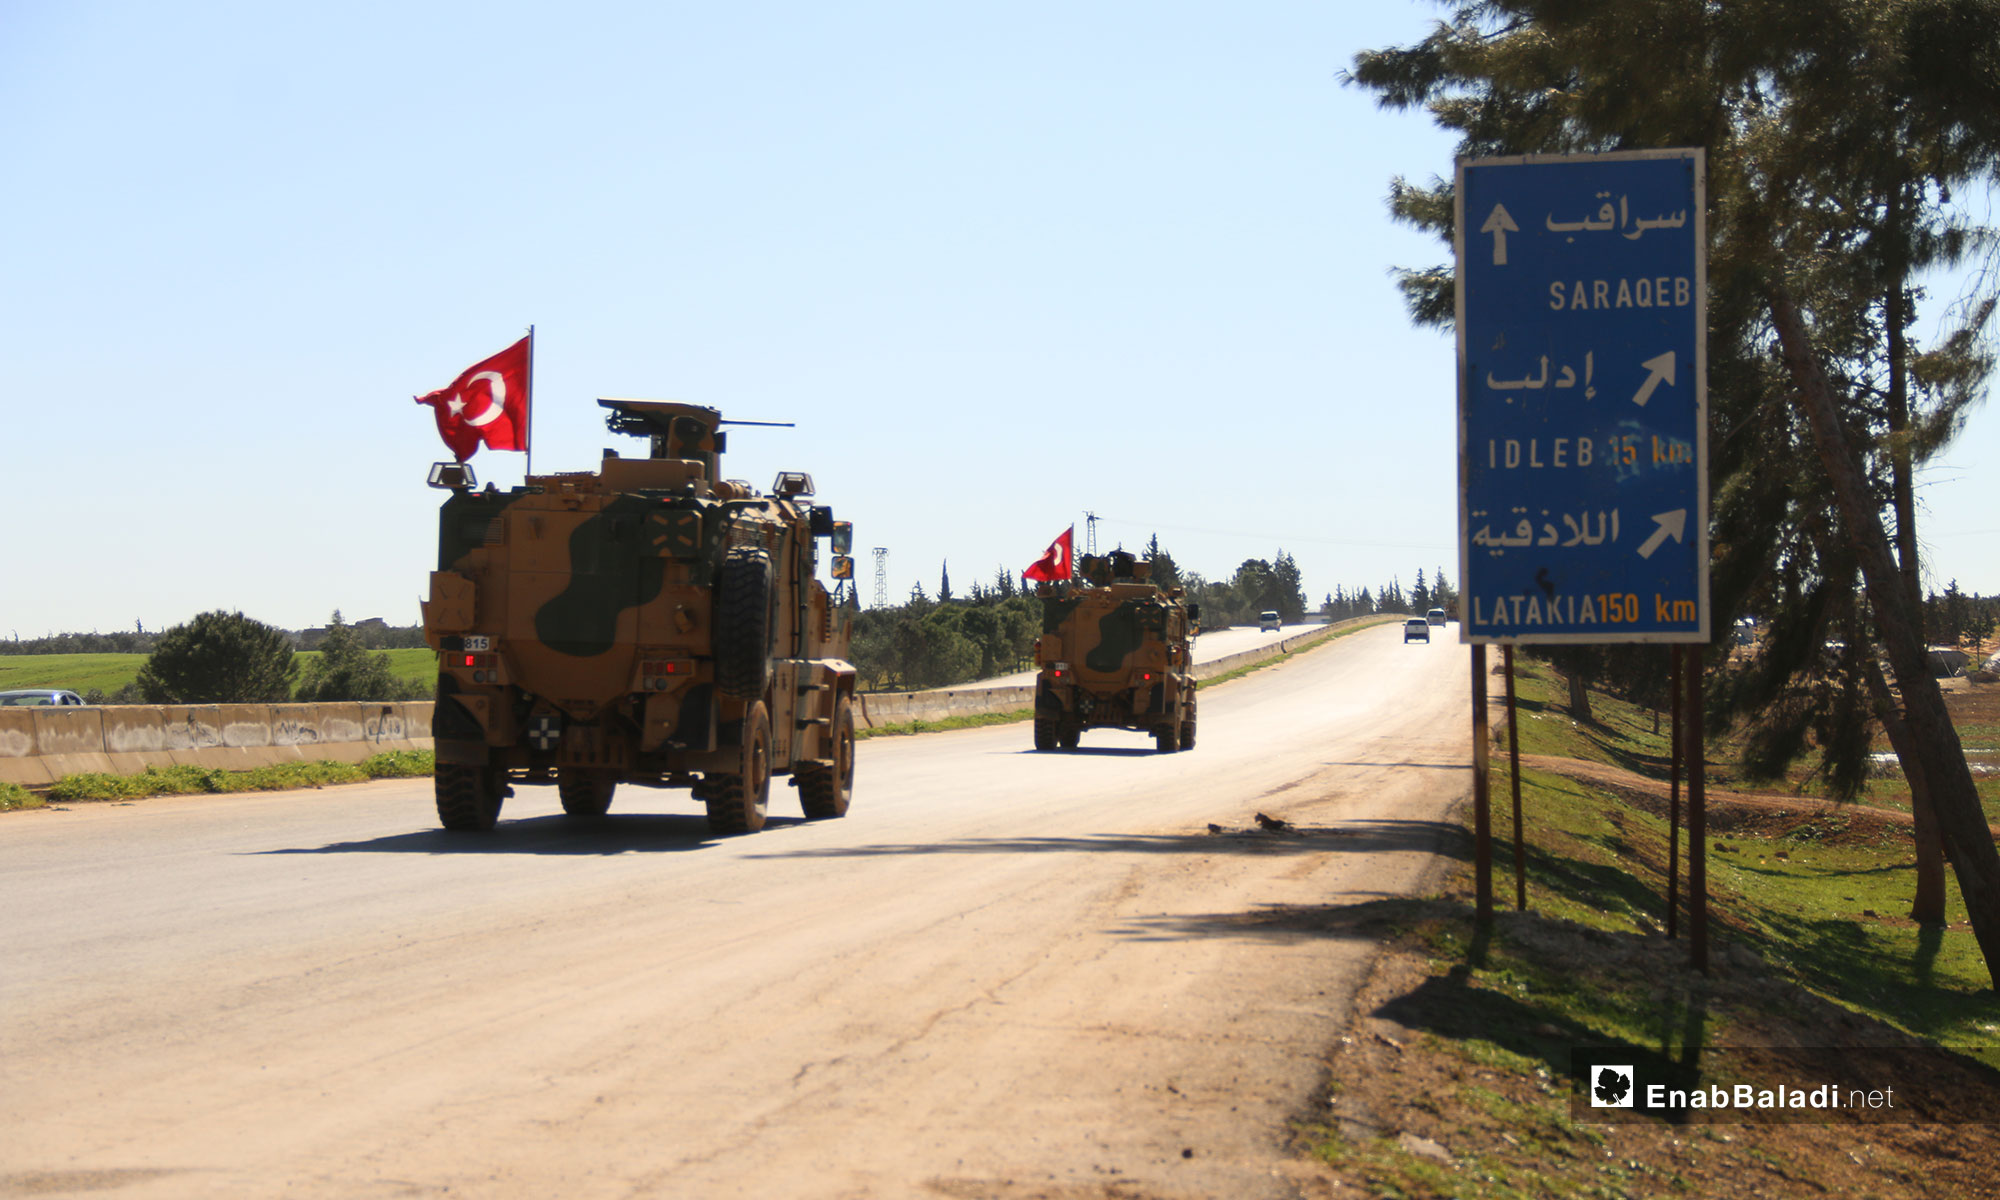 A Turkish patrol’s passage through Idlib governorate, hours after it entered the demilitarized zone under a Russian deal – March 8, 2019 (Enab Baladi)